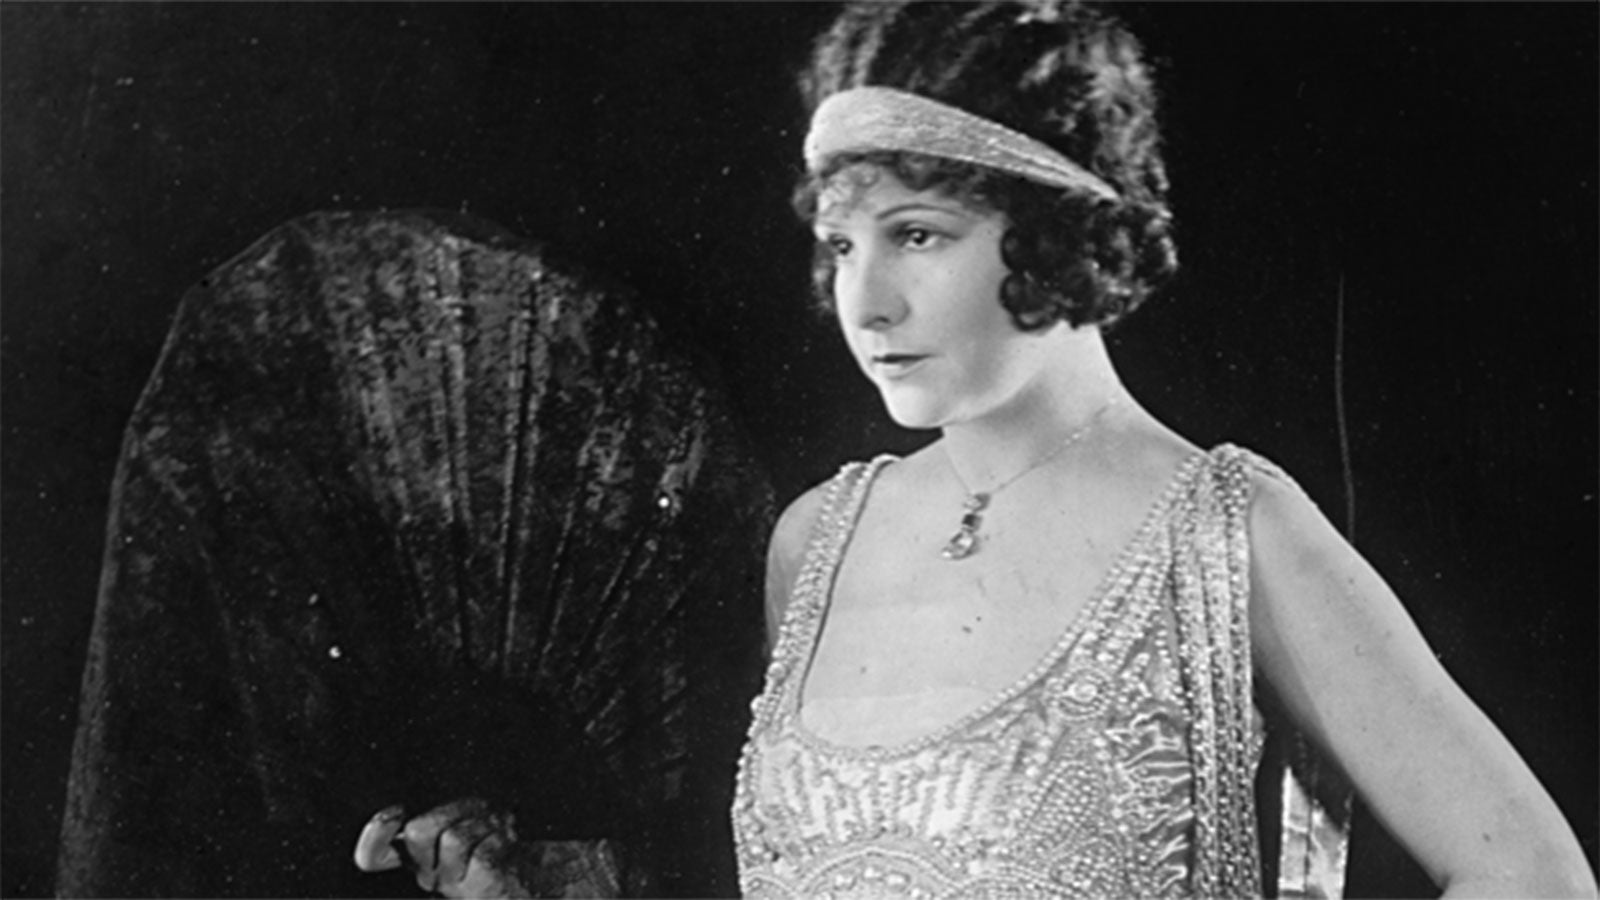 Photo of a flapper girl holding a fan